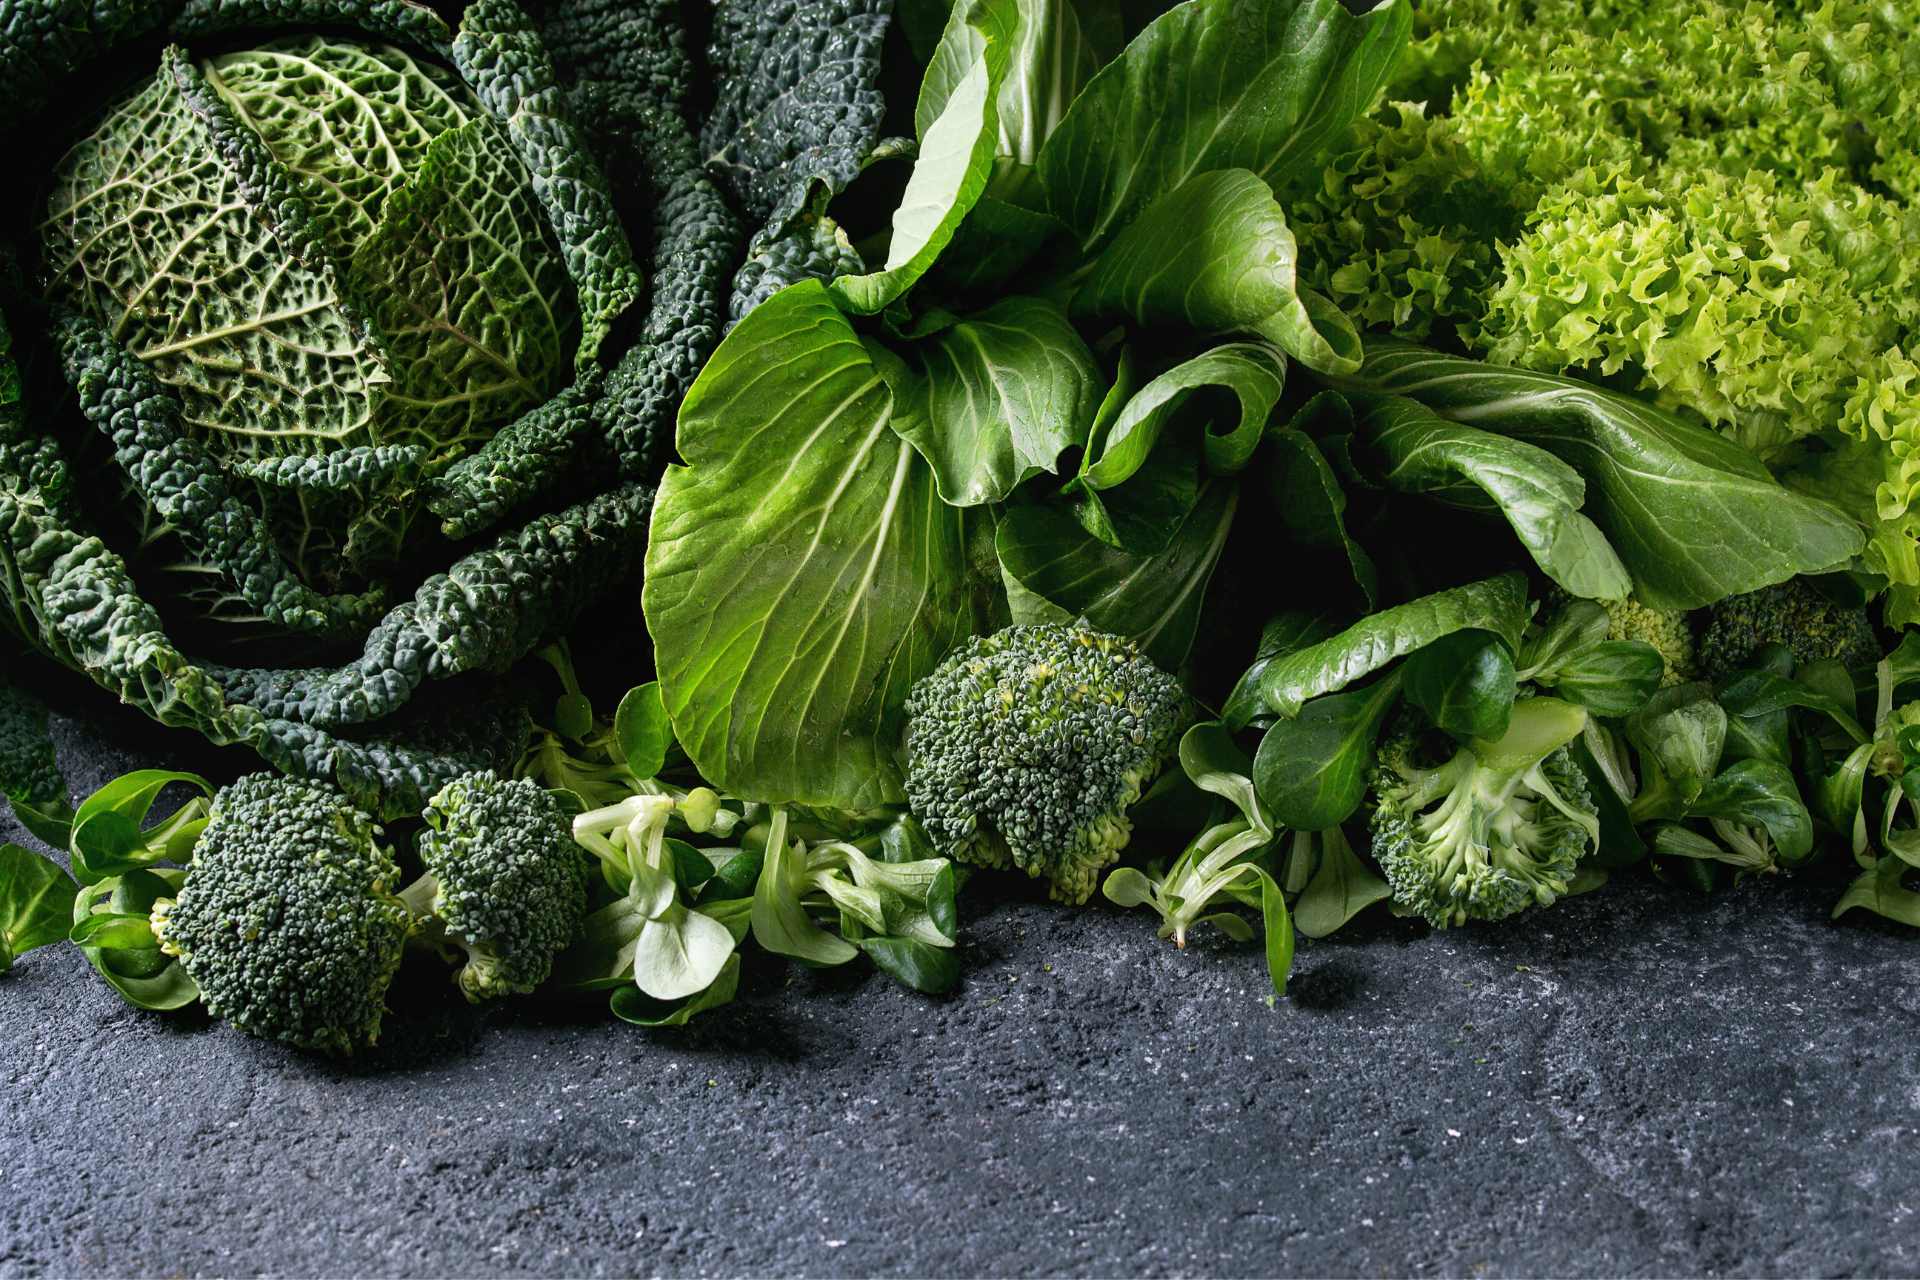 Why You Should Make Leafy Greens a Staple in Your Diet